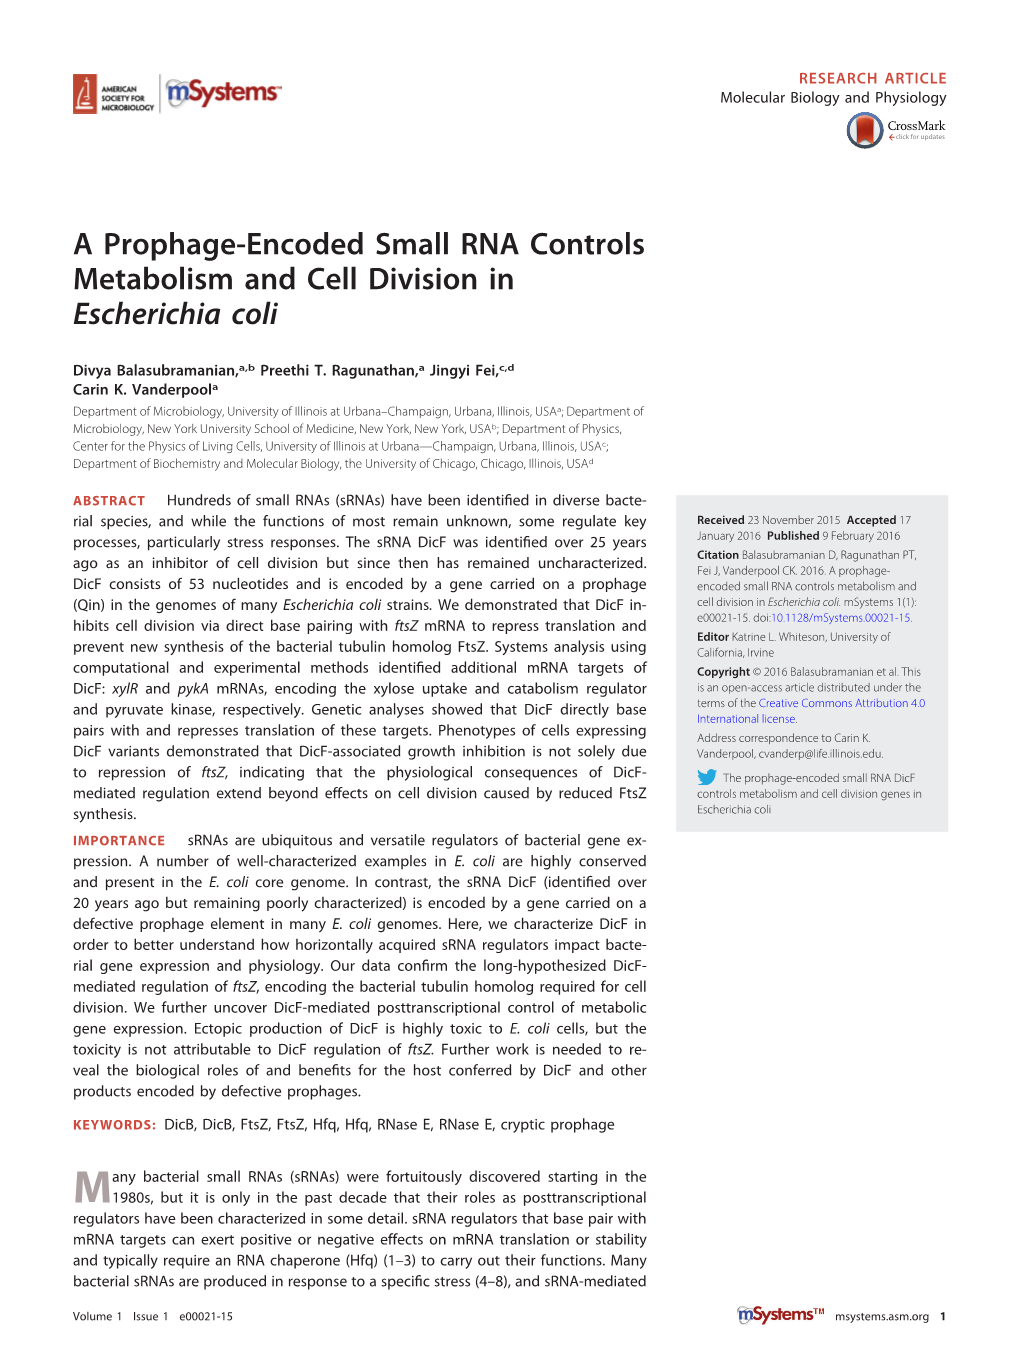 A Prophage-Encoded Small RNA Controls Metabolism and Cell Division in Escherichia Coli